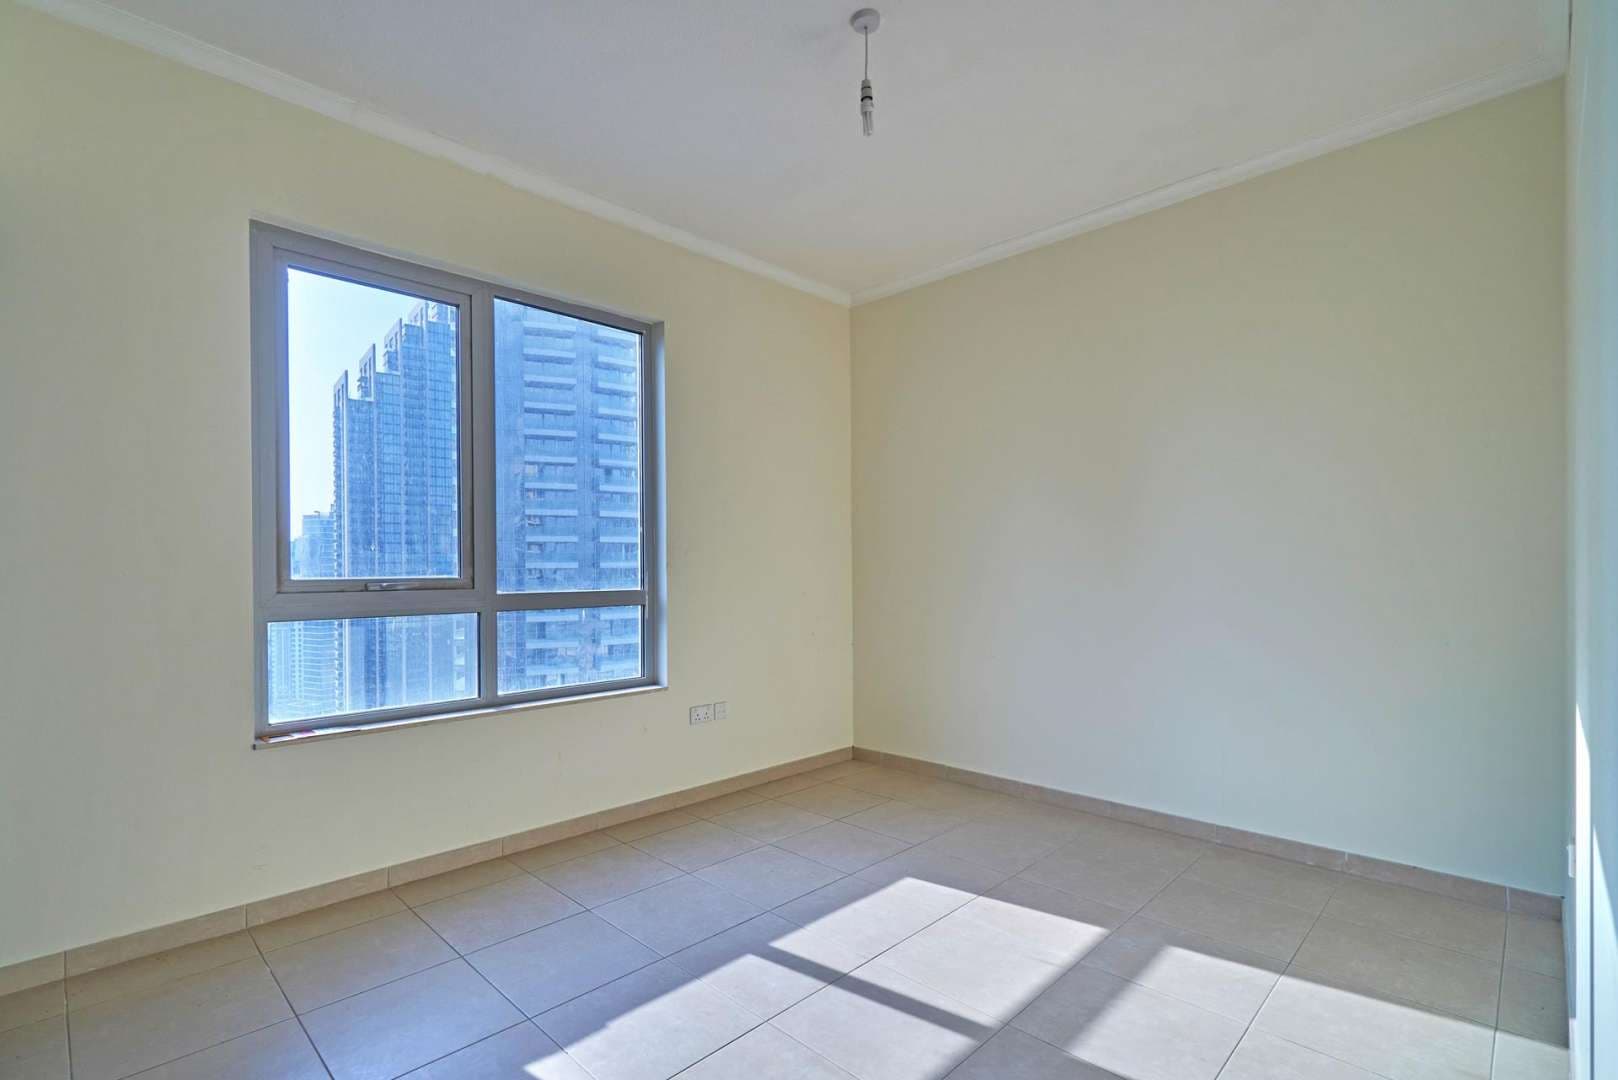 2 Bedroom Apartment For Rent The Residences Downtown Dubai Lp05301 Dc5ad0afd7c6a00.jpg